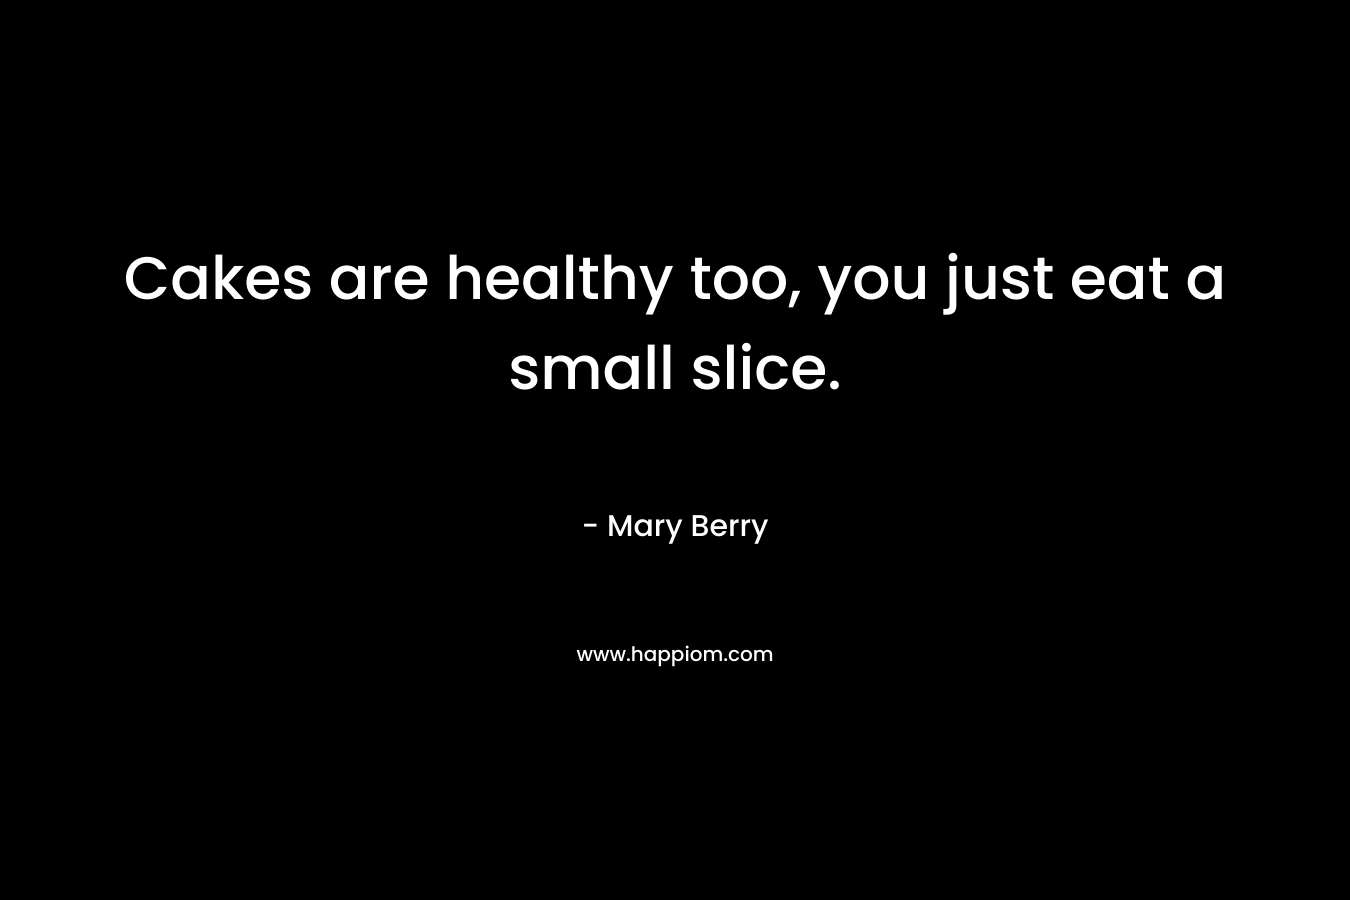 Cakes are healthy too, you just eat a small slice. – Mary Berry